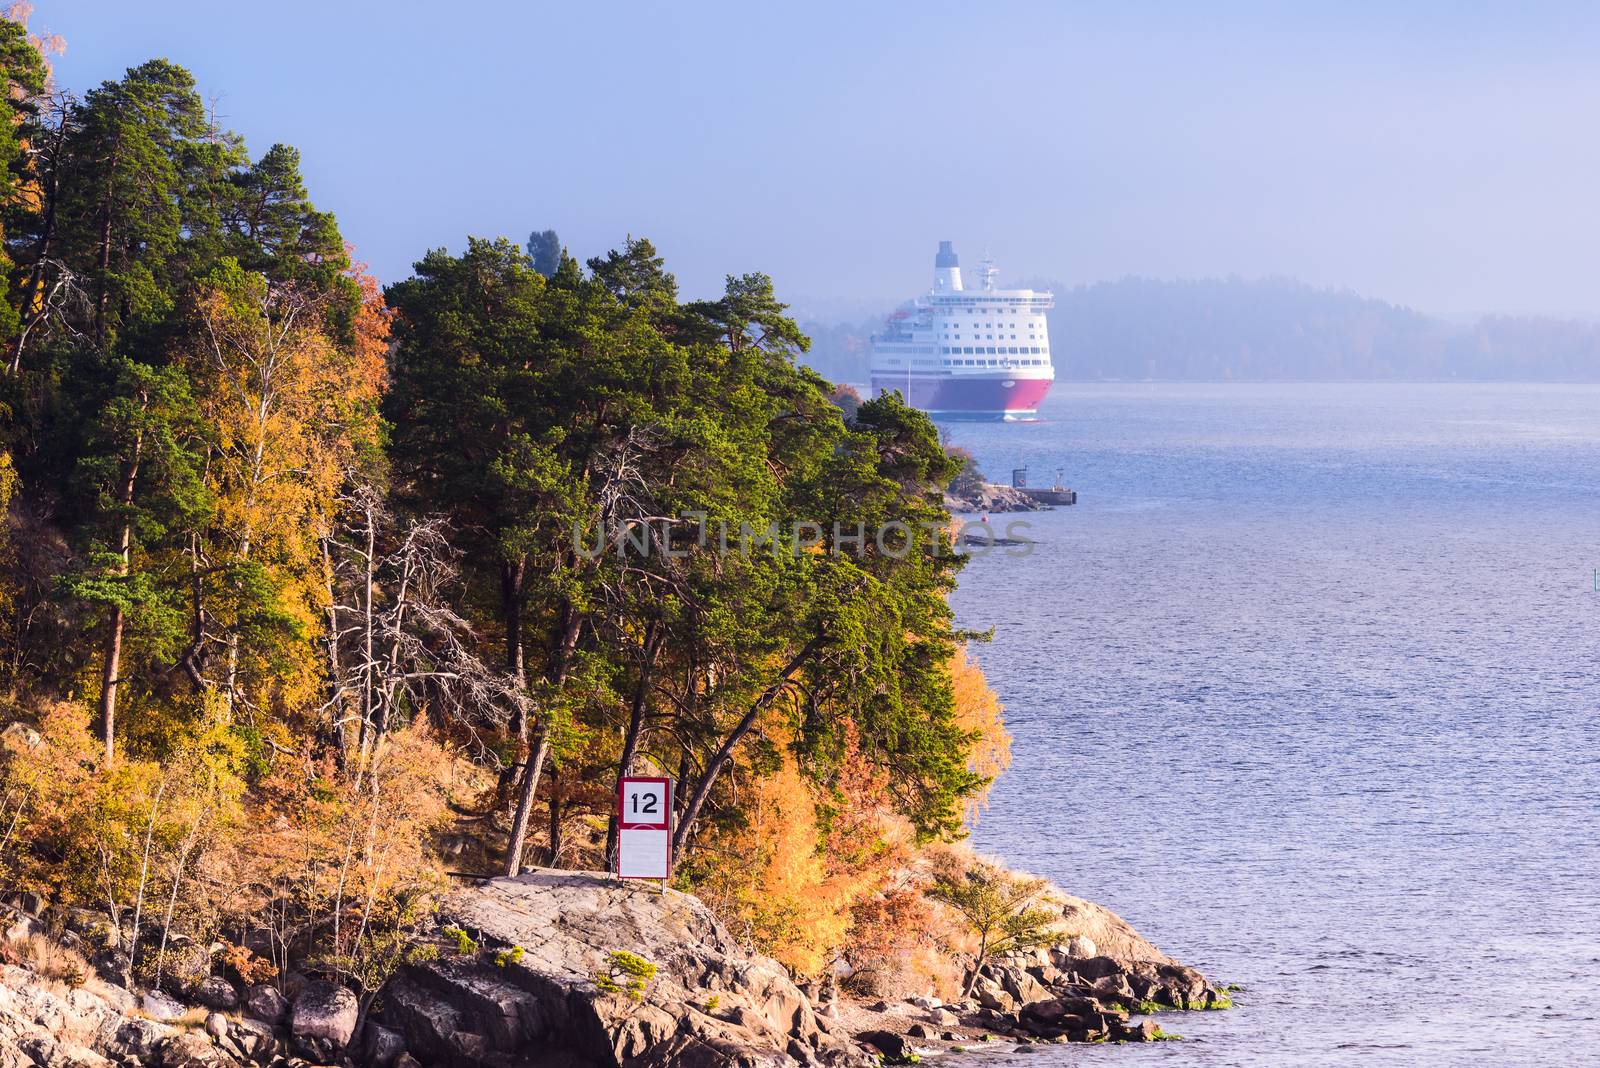 Swedish sea fjord and cruise ship by styf22